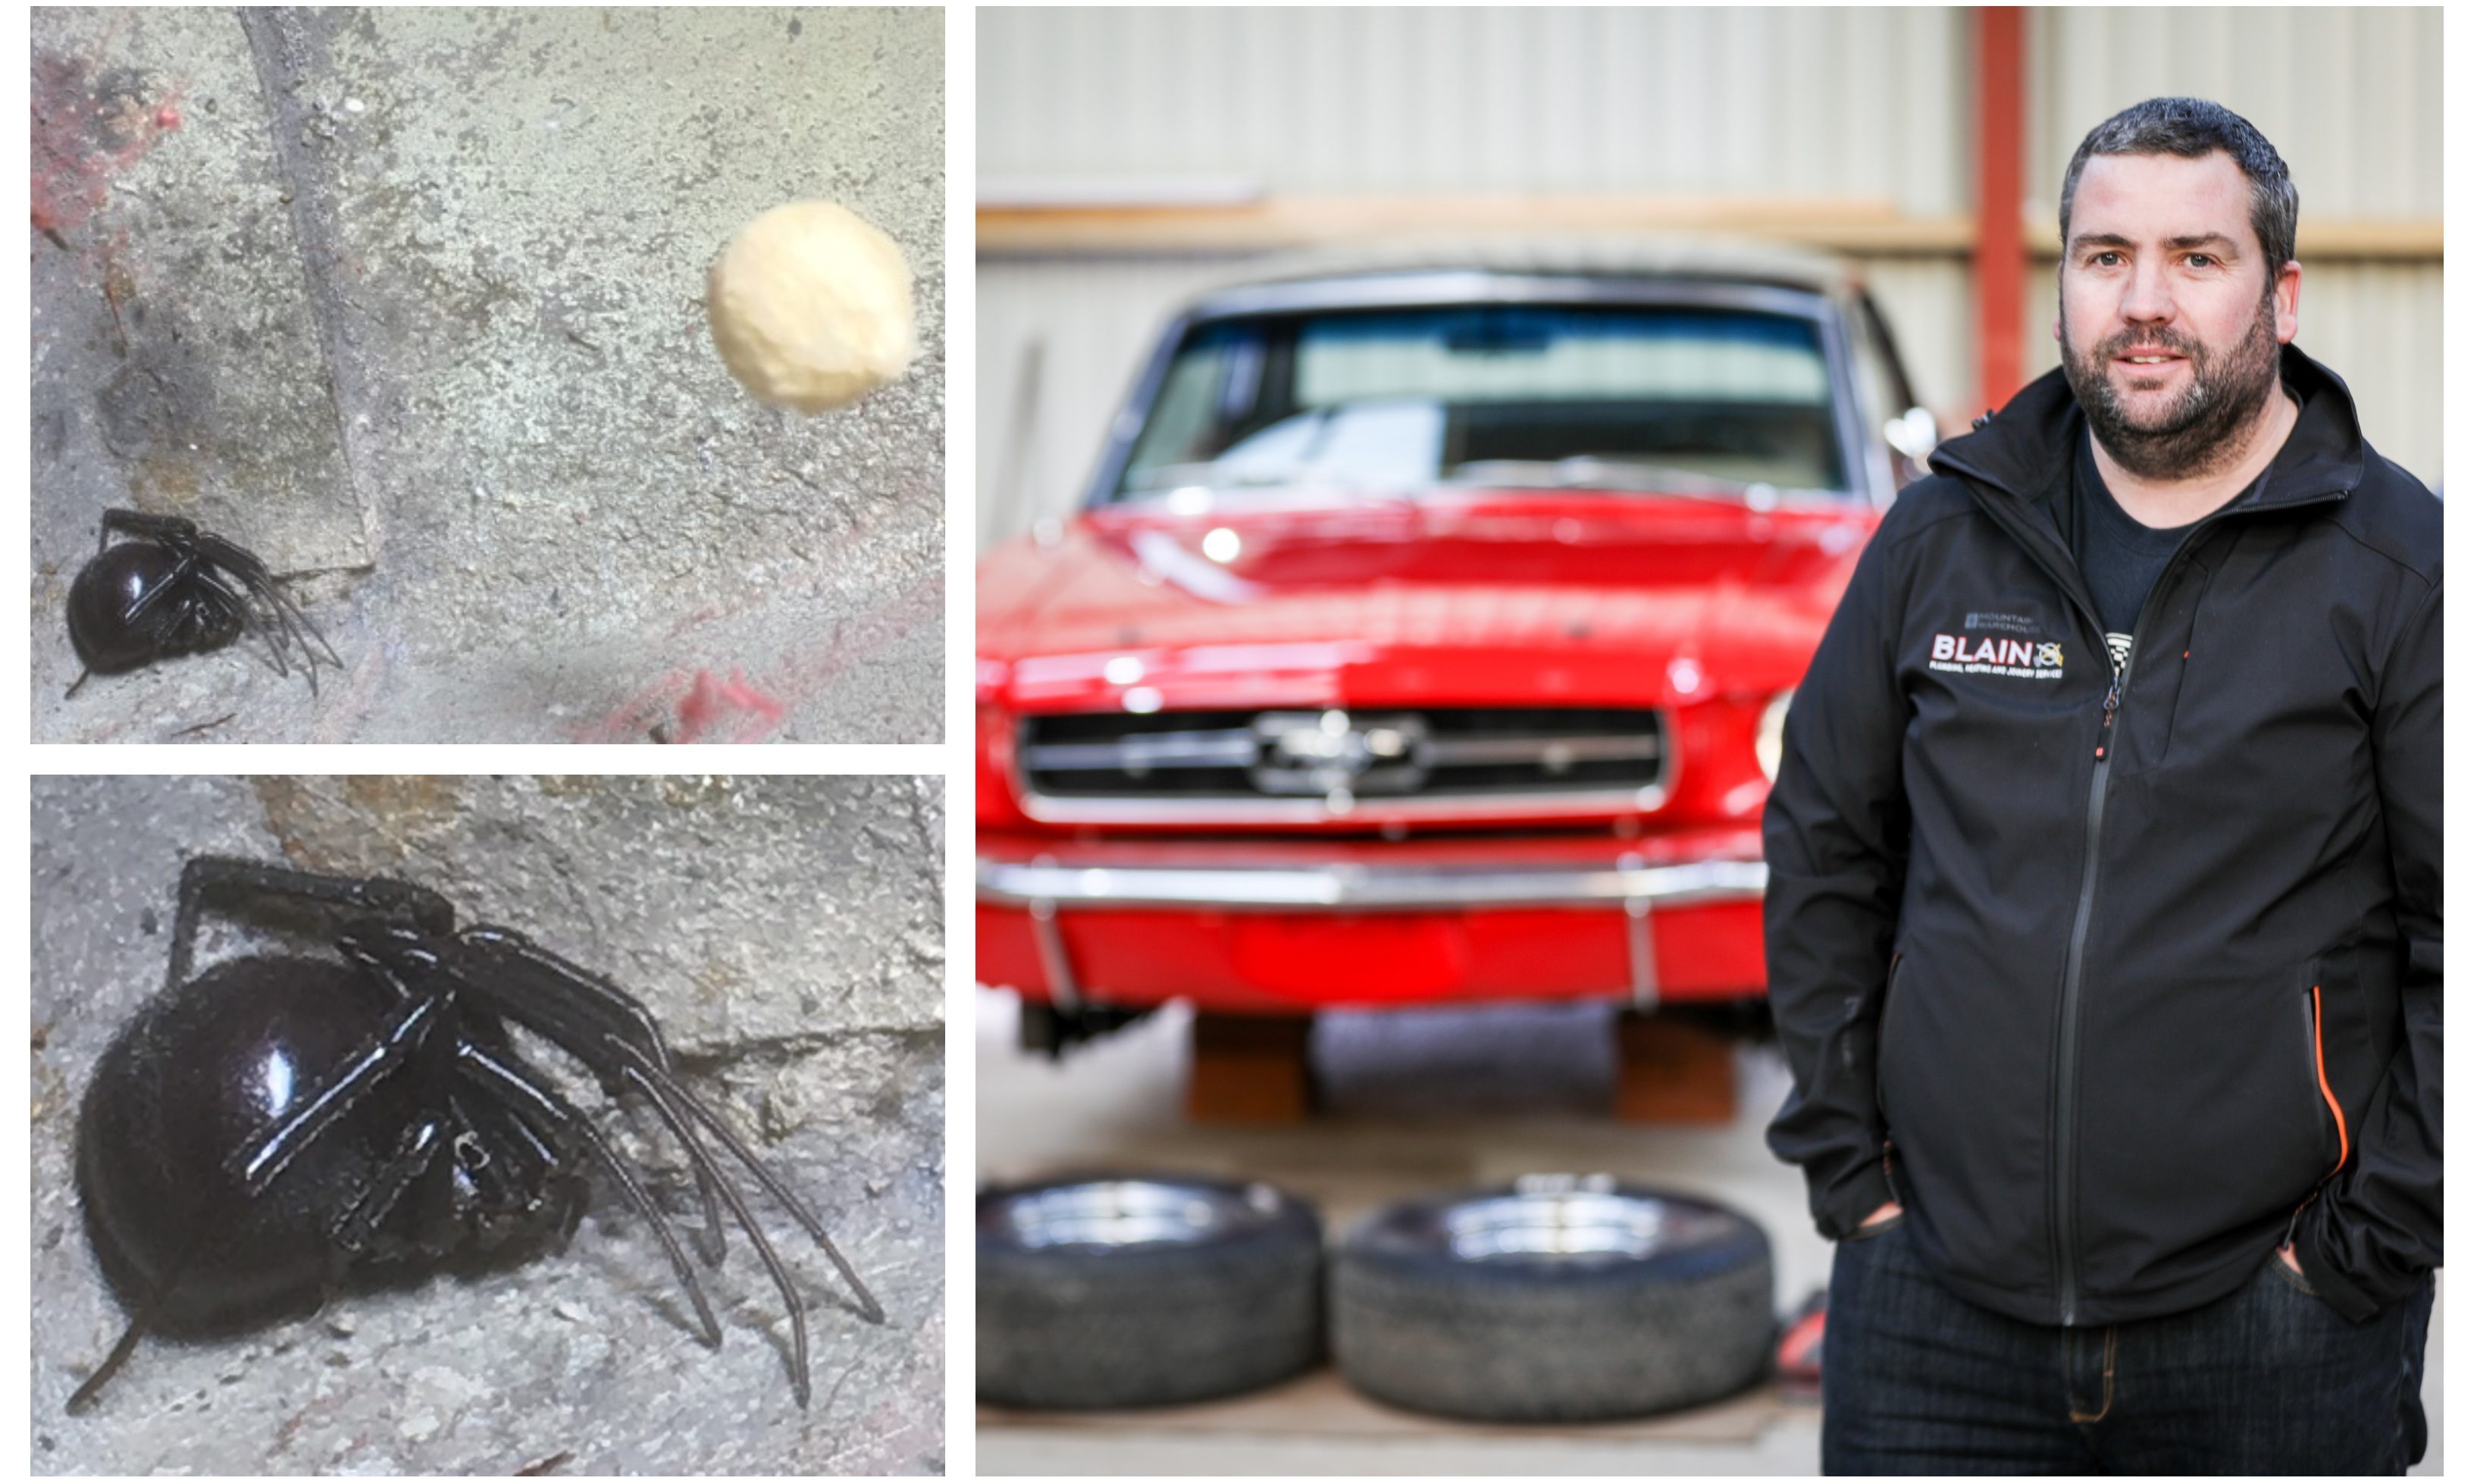 The black widow spiders were found on John Blains 1965 Mustang.